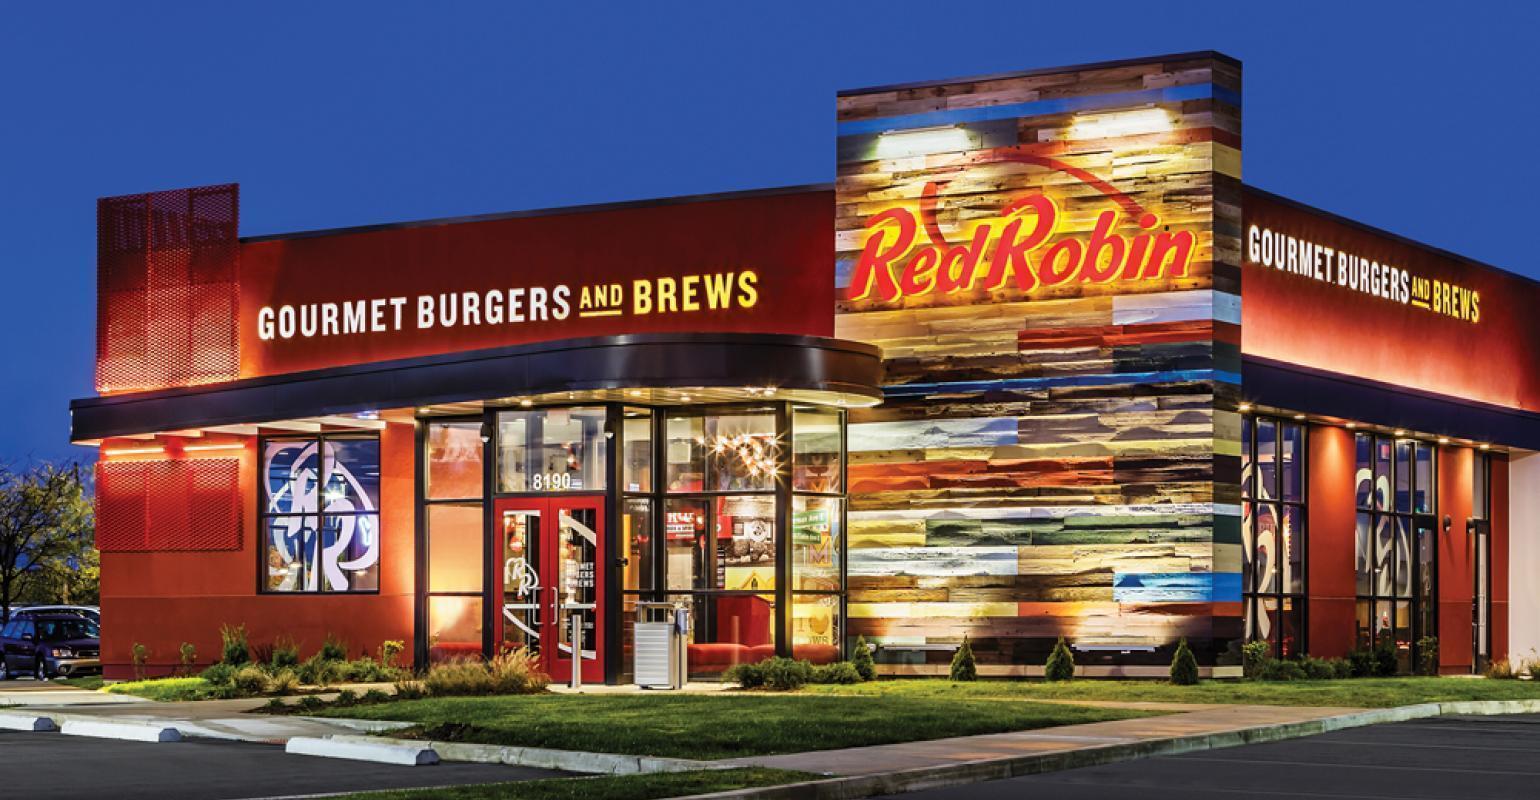 Red Robin Gourmet Burgers - Looks like we found out who's been